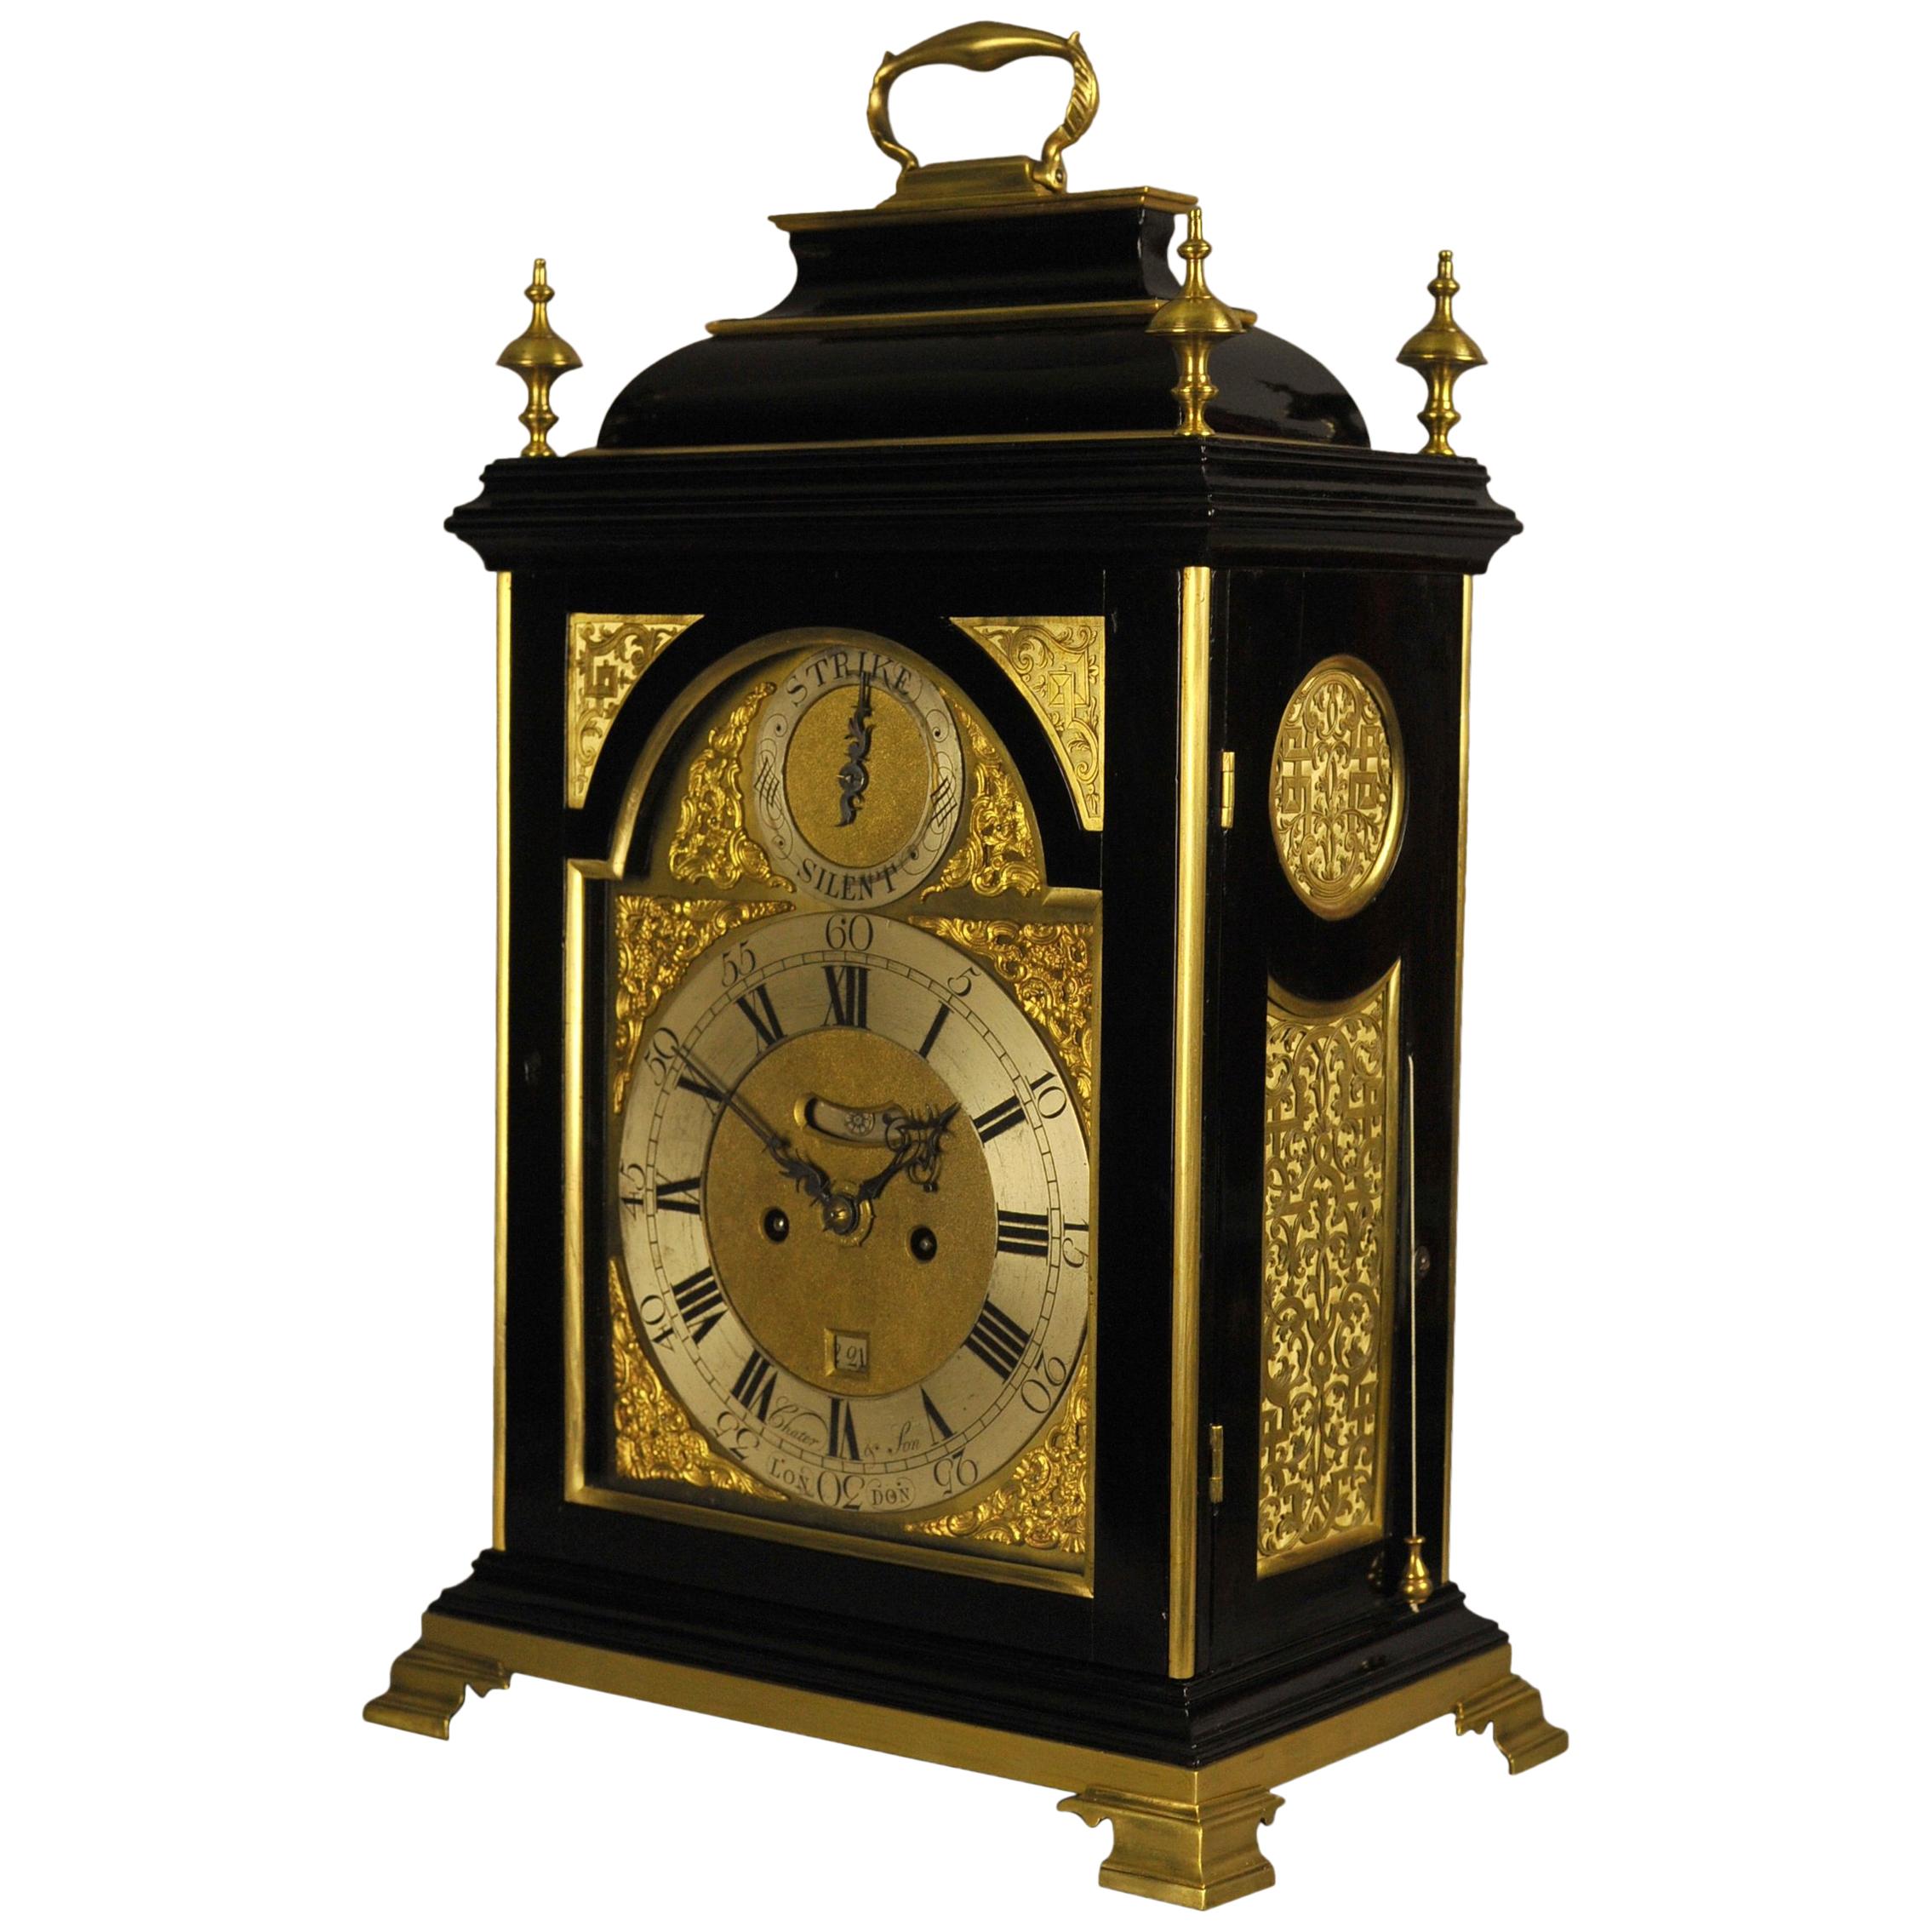 Fine Verge Bracket Clock with Alarm, Chater and Son, London For Sale